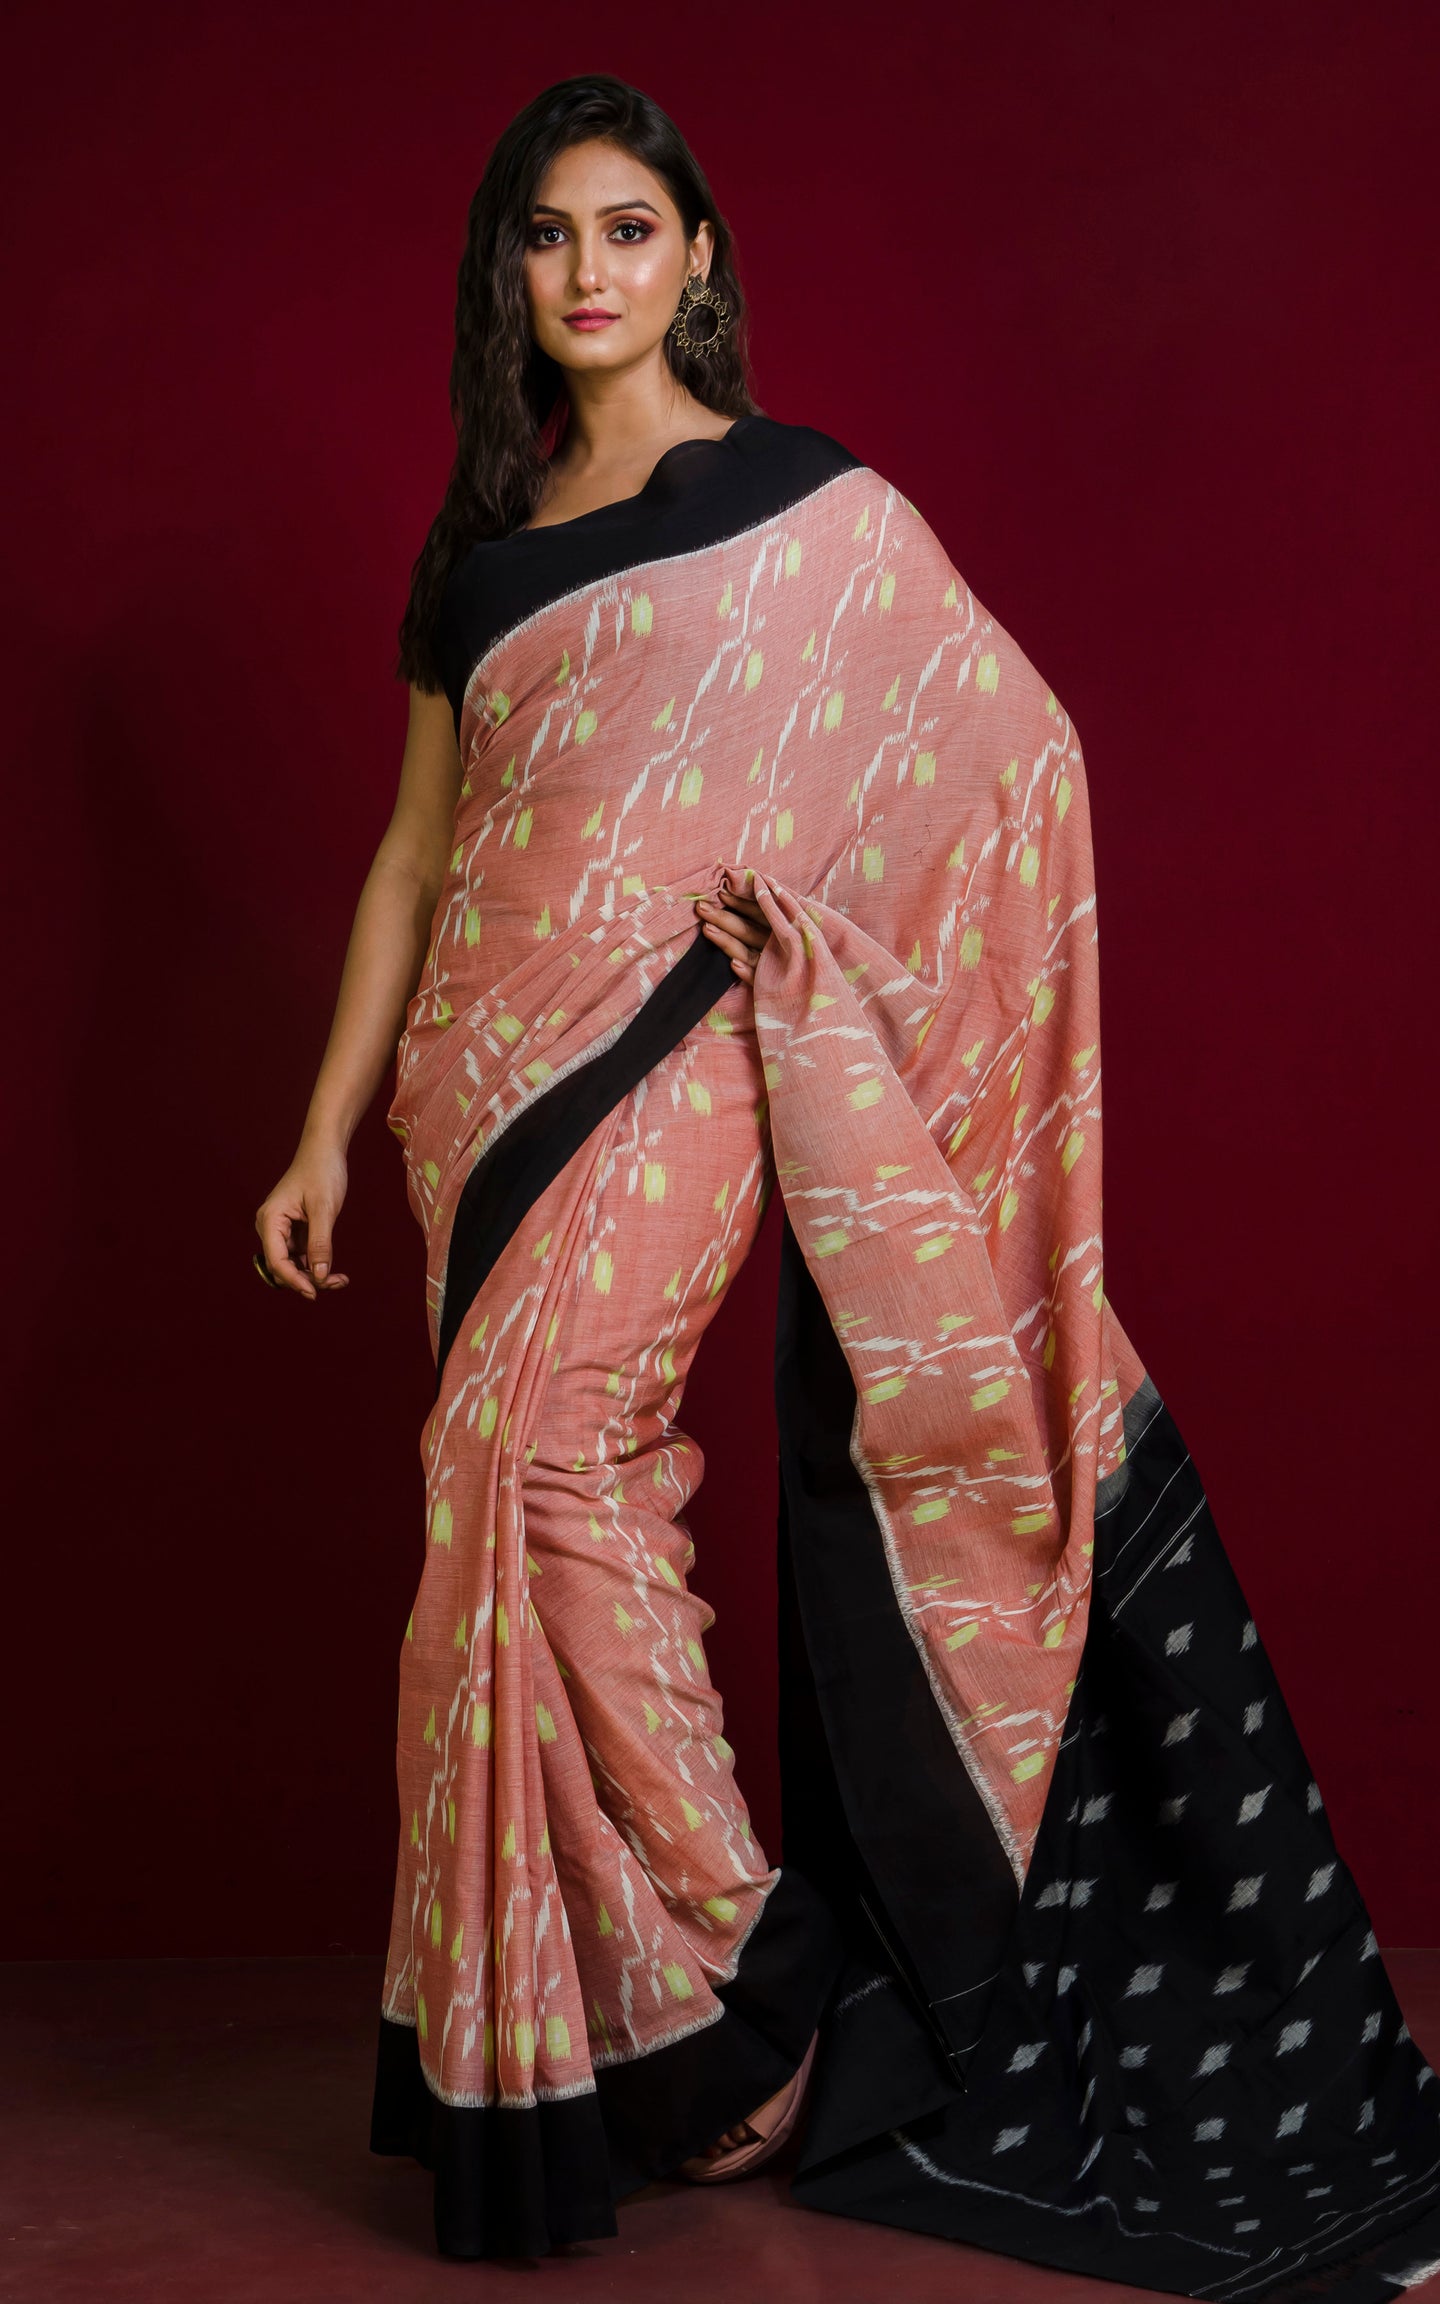 Soft Mercerized Cotton Ikkat Pochampally Saree in Pale Chestnut Brown, Off White, Pale Yellow and Black